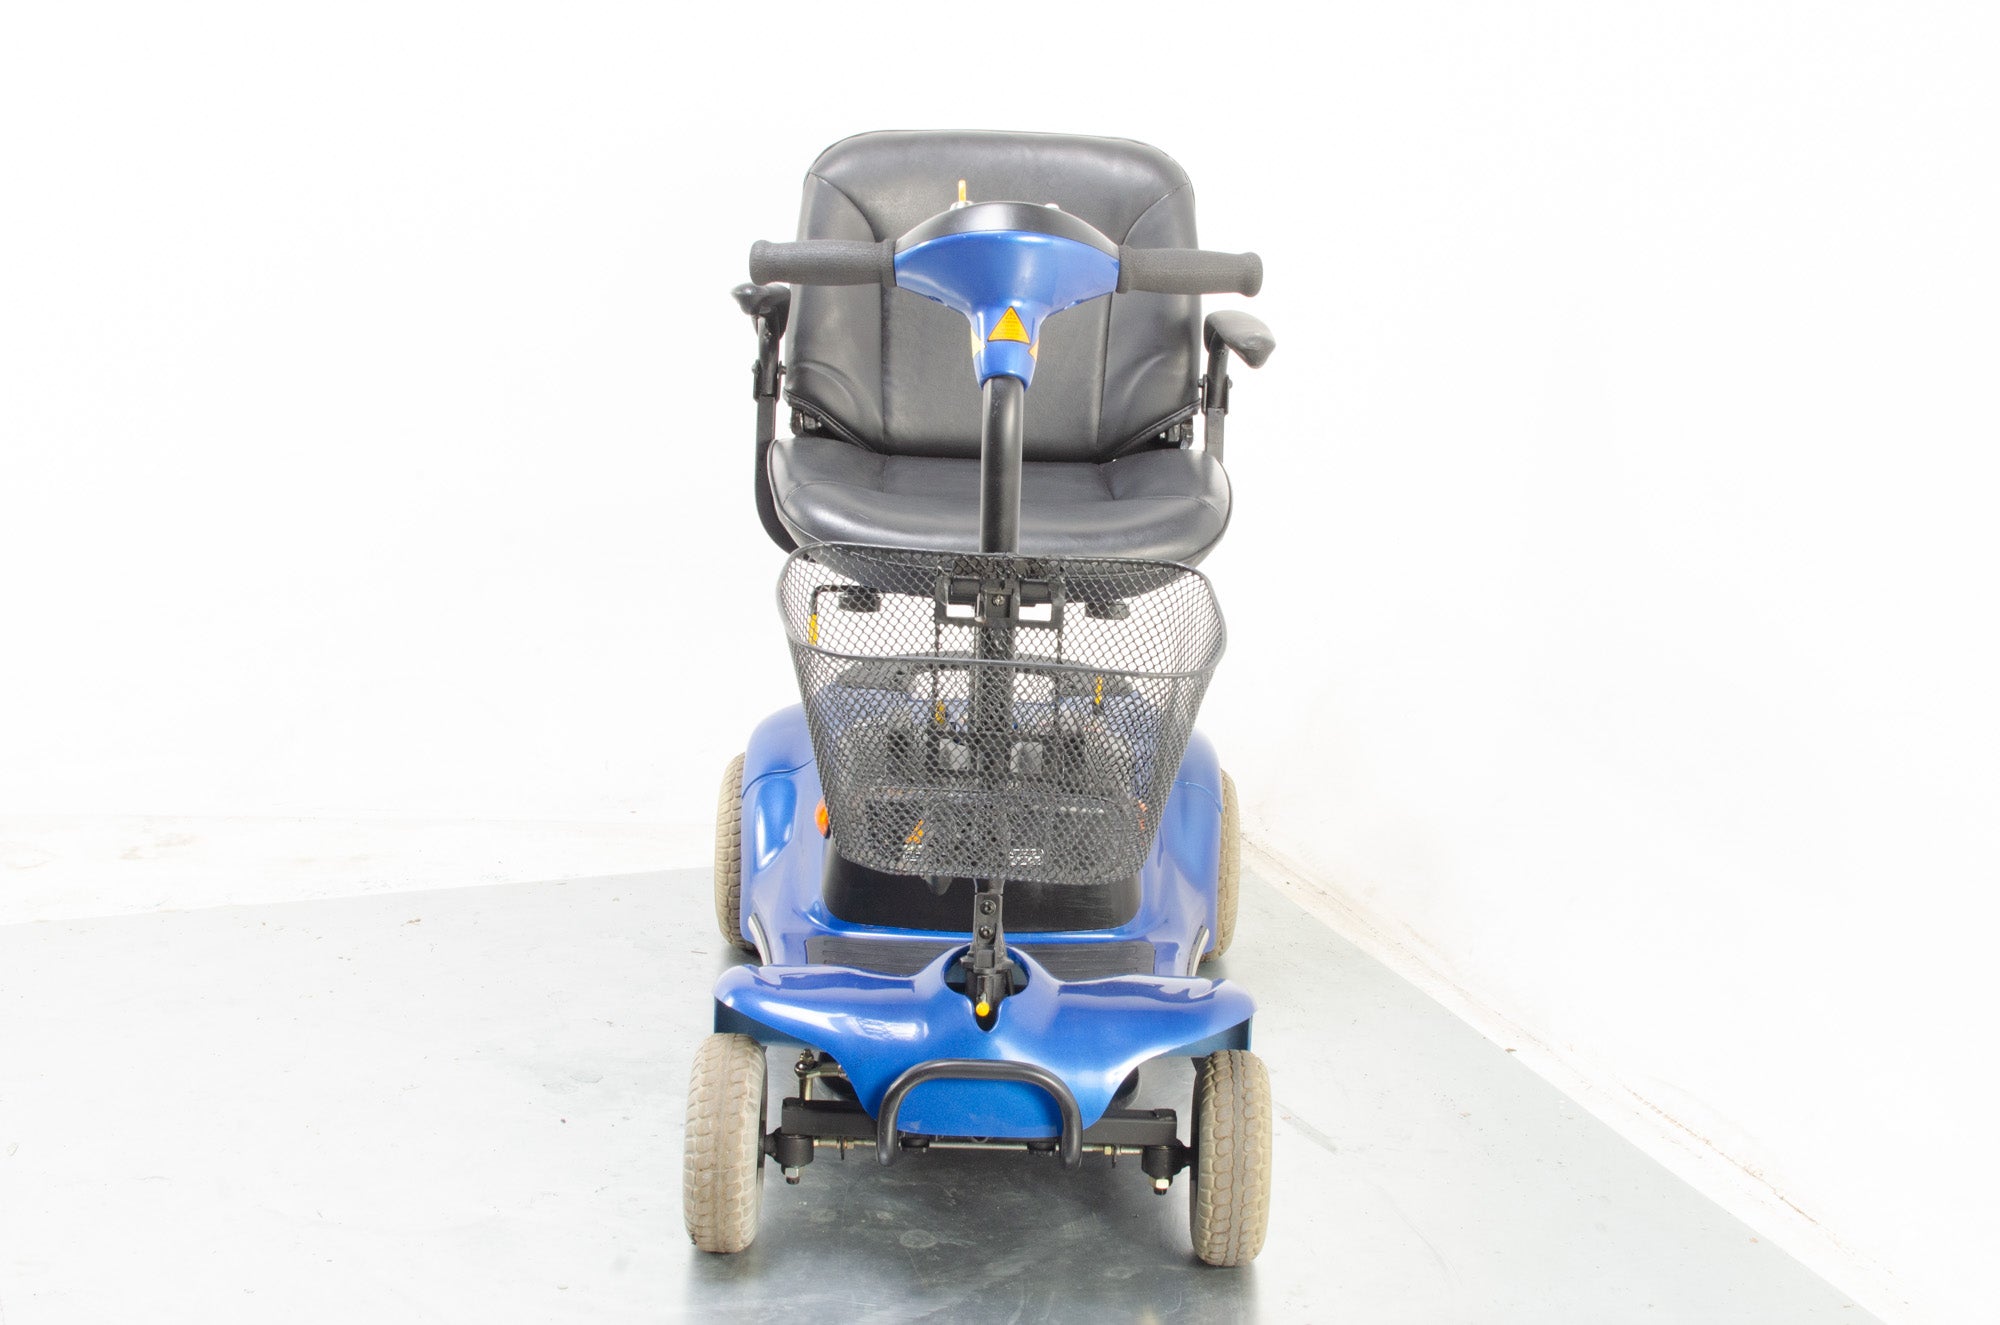 2017 Sunrise Medical Sterling Pearl 4mph Small Electric Mobility Boot Scooter in Blue